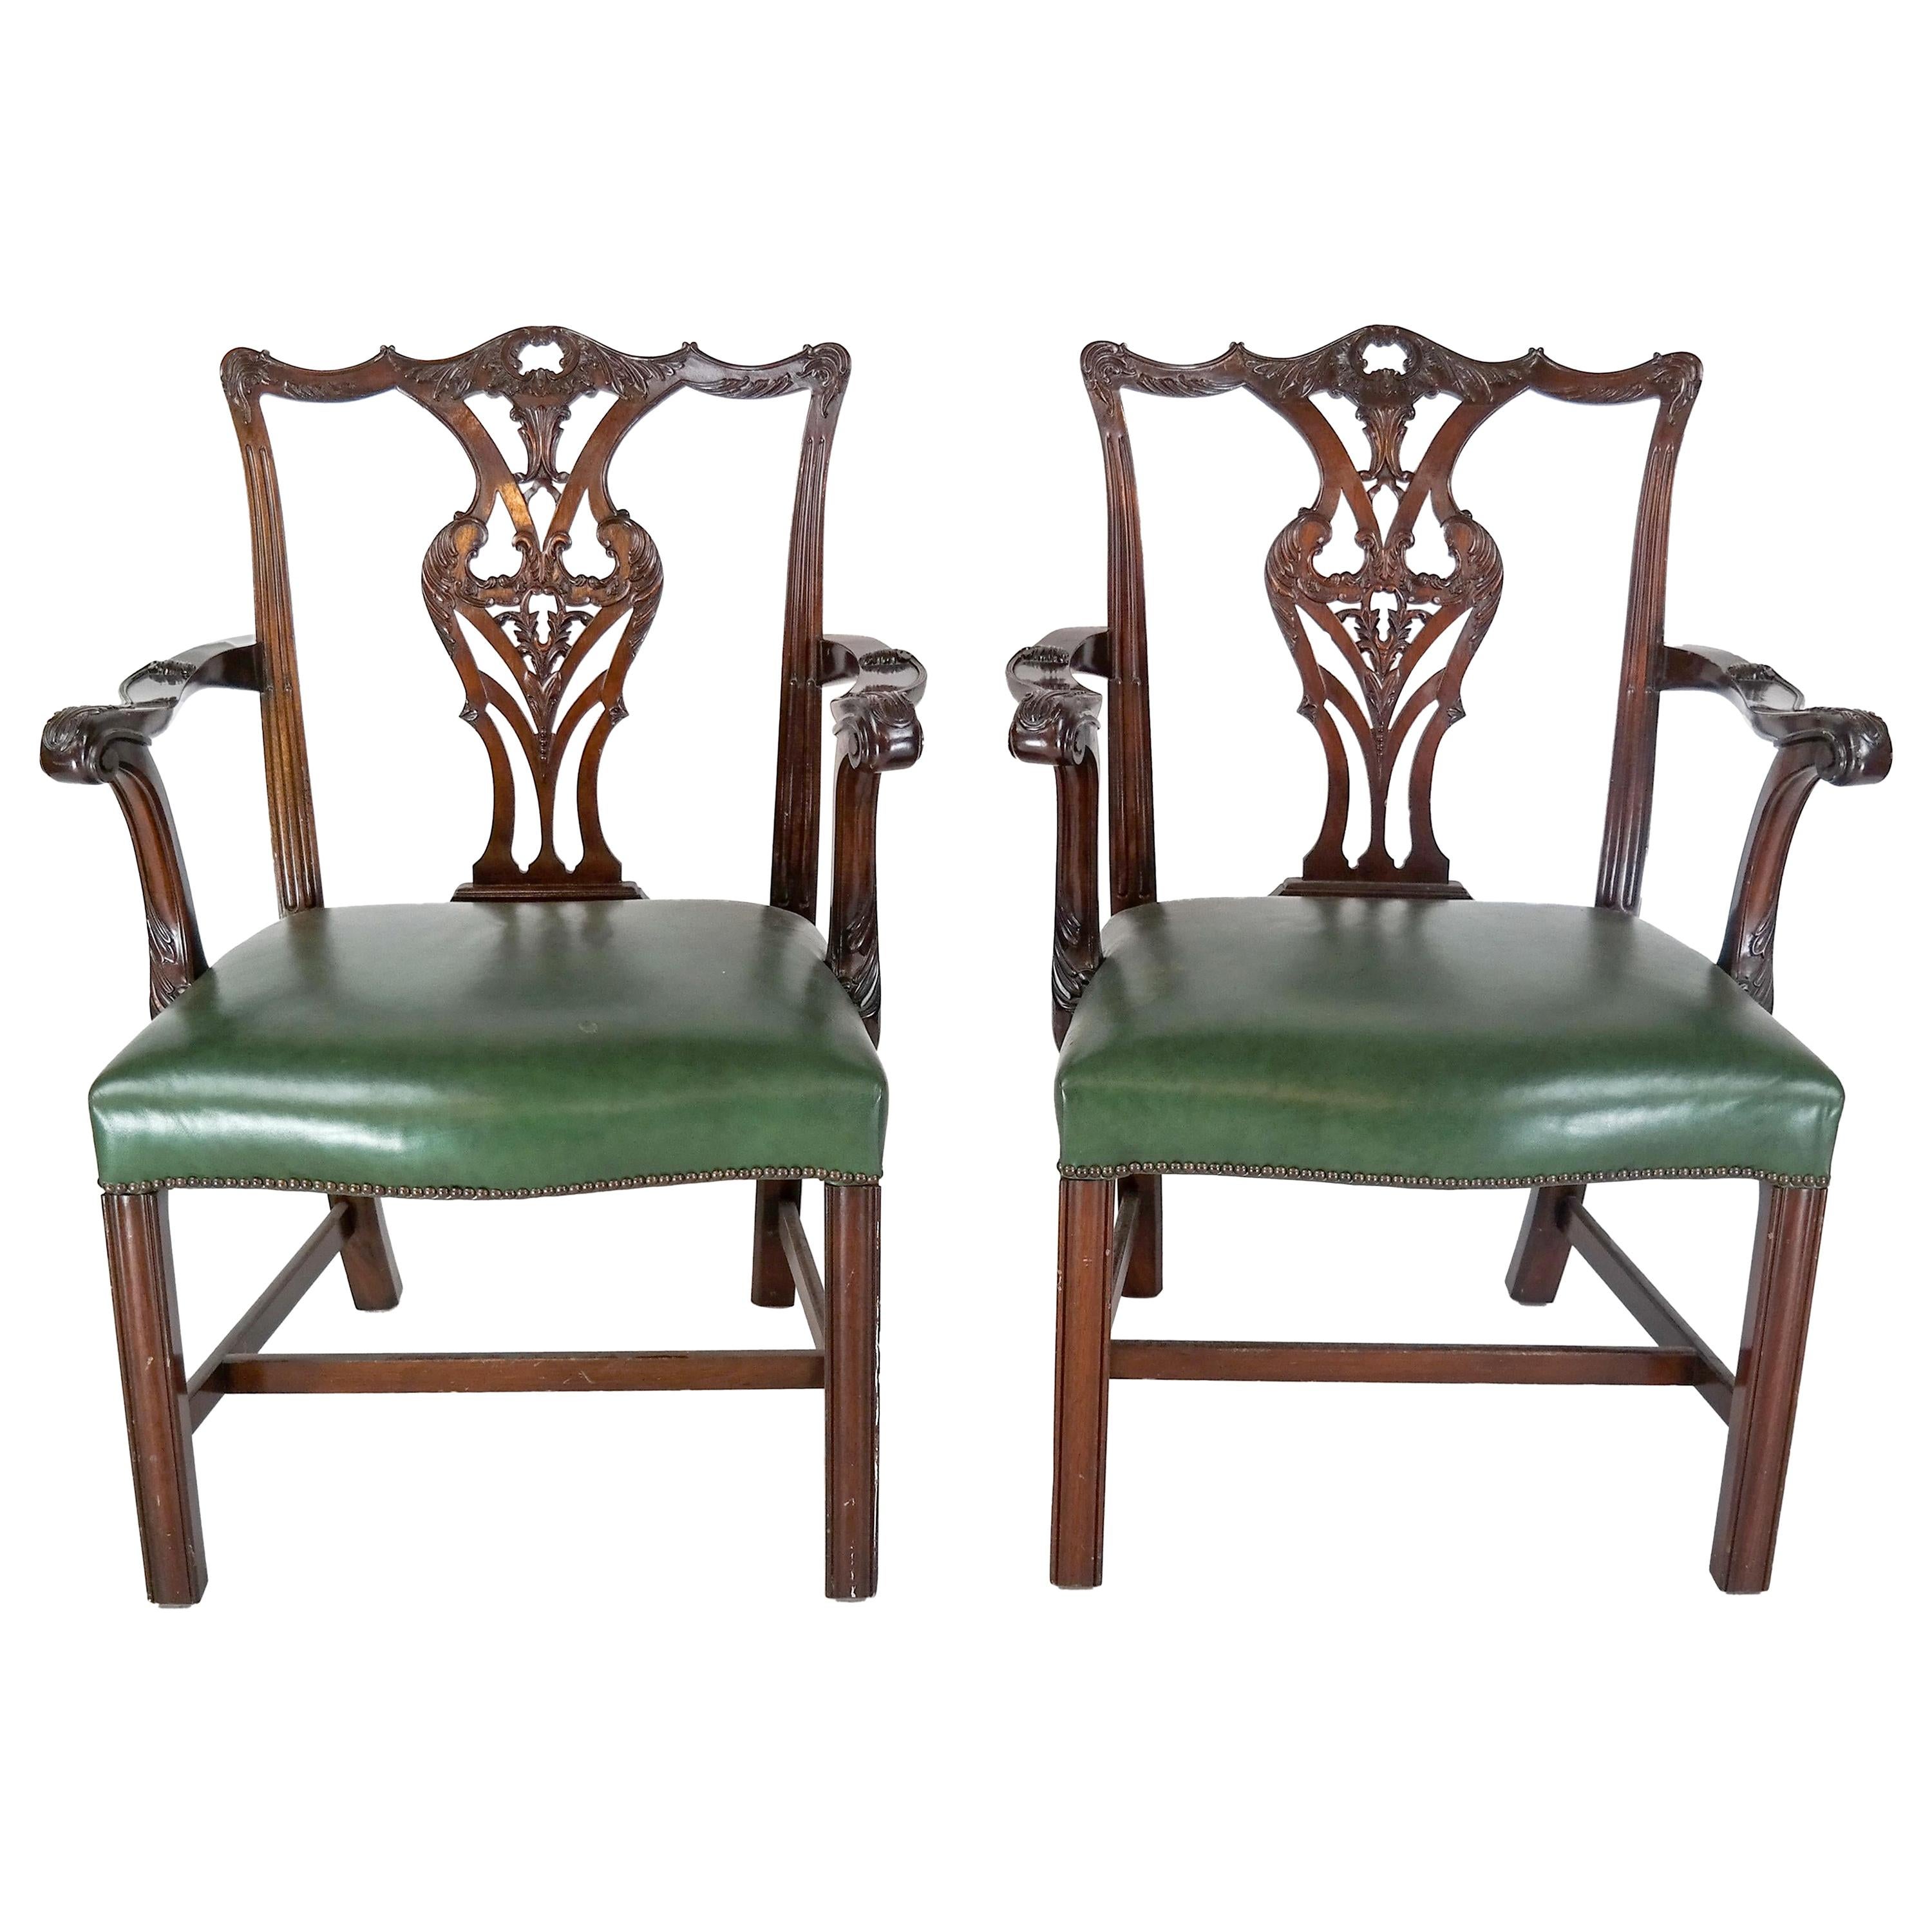 Pair of Regency Mahogany Arm Chairs in Green Leather